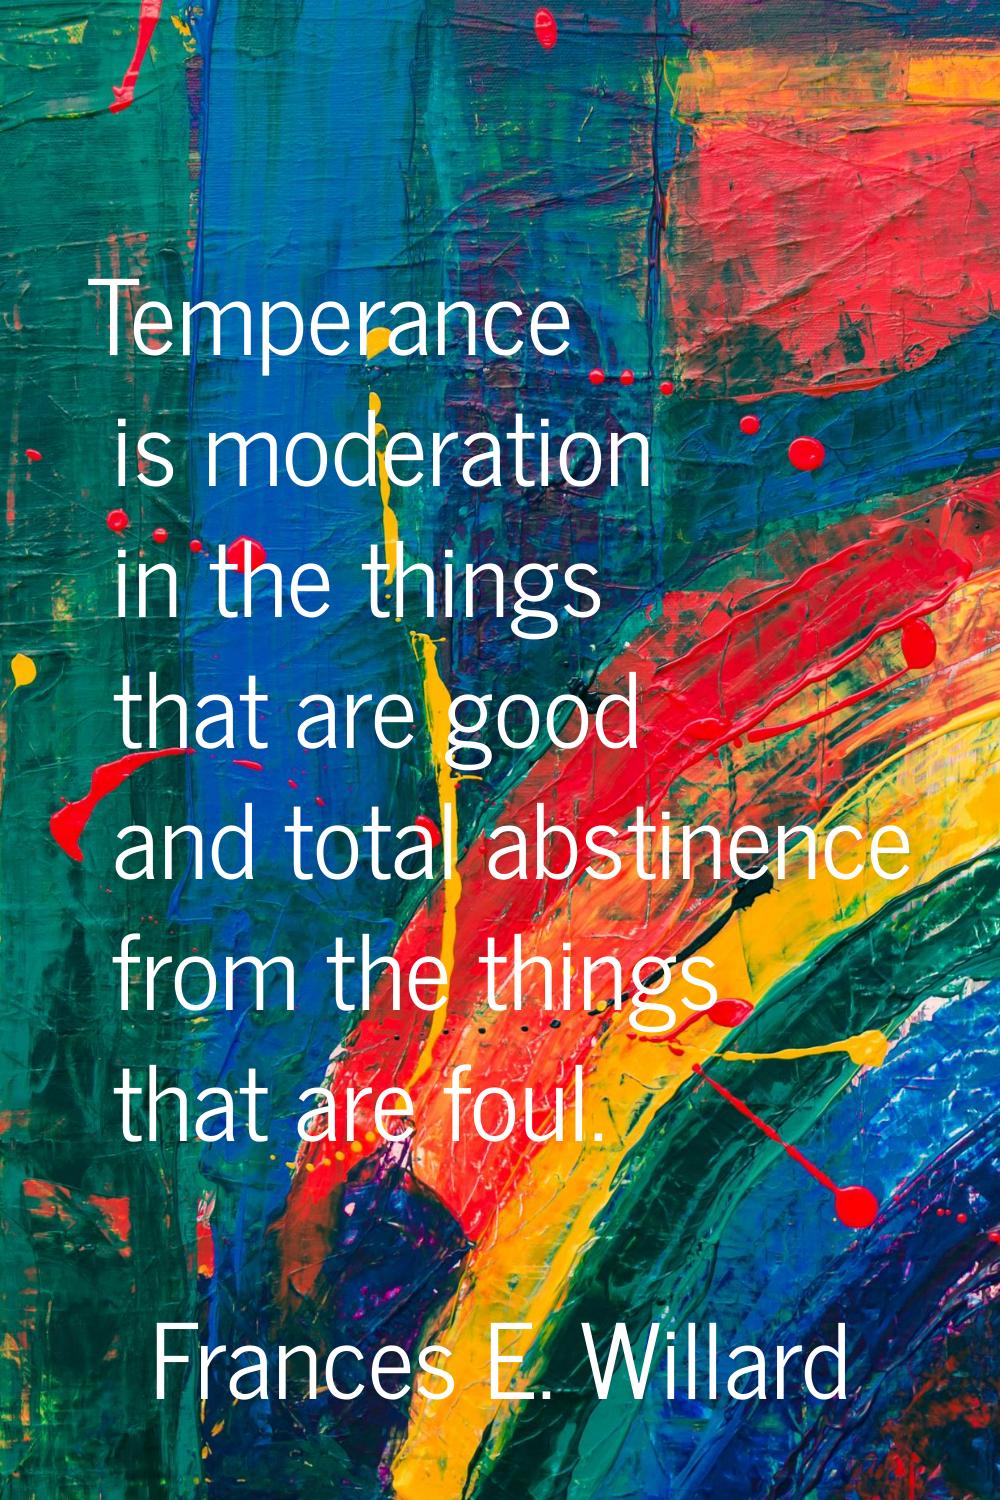 Temperance is moderation in the things that are good and total abstinence from the things that are 